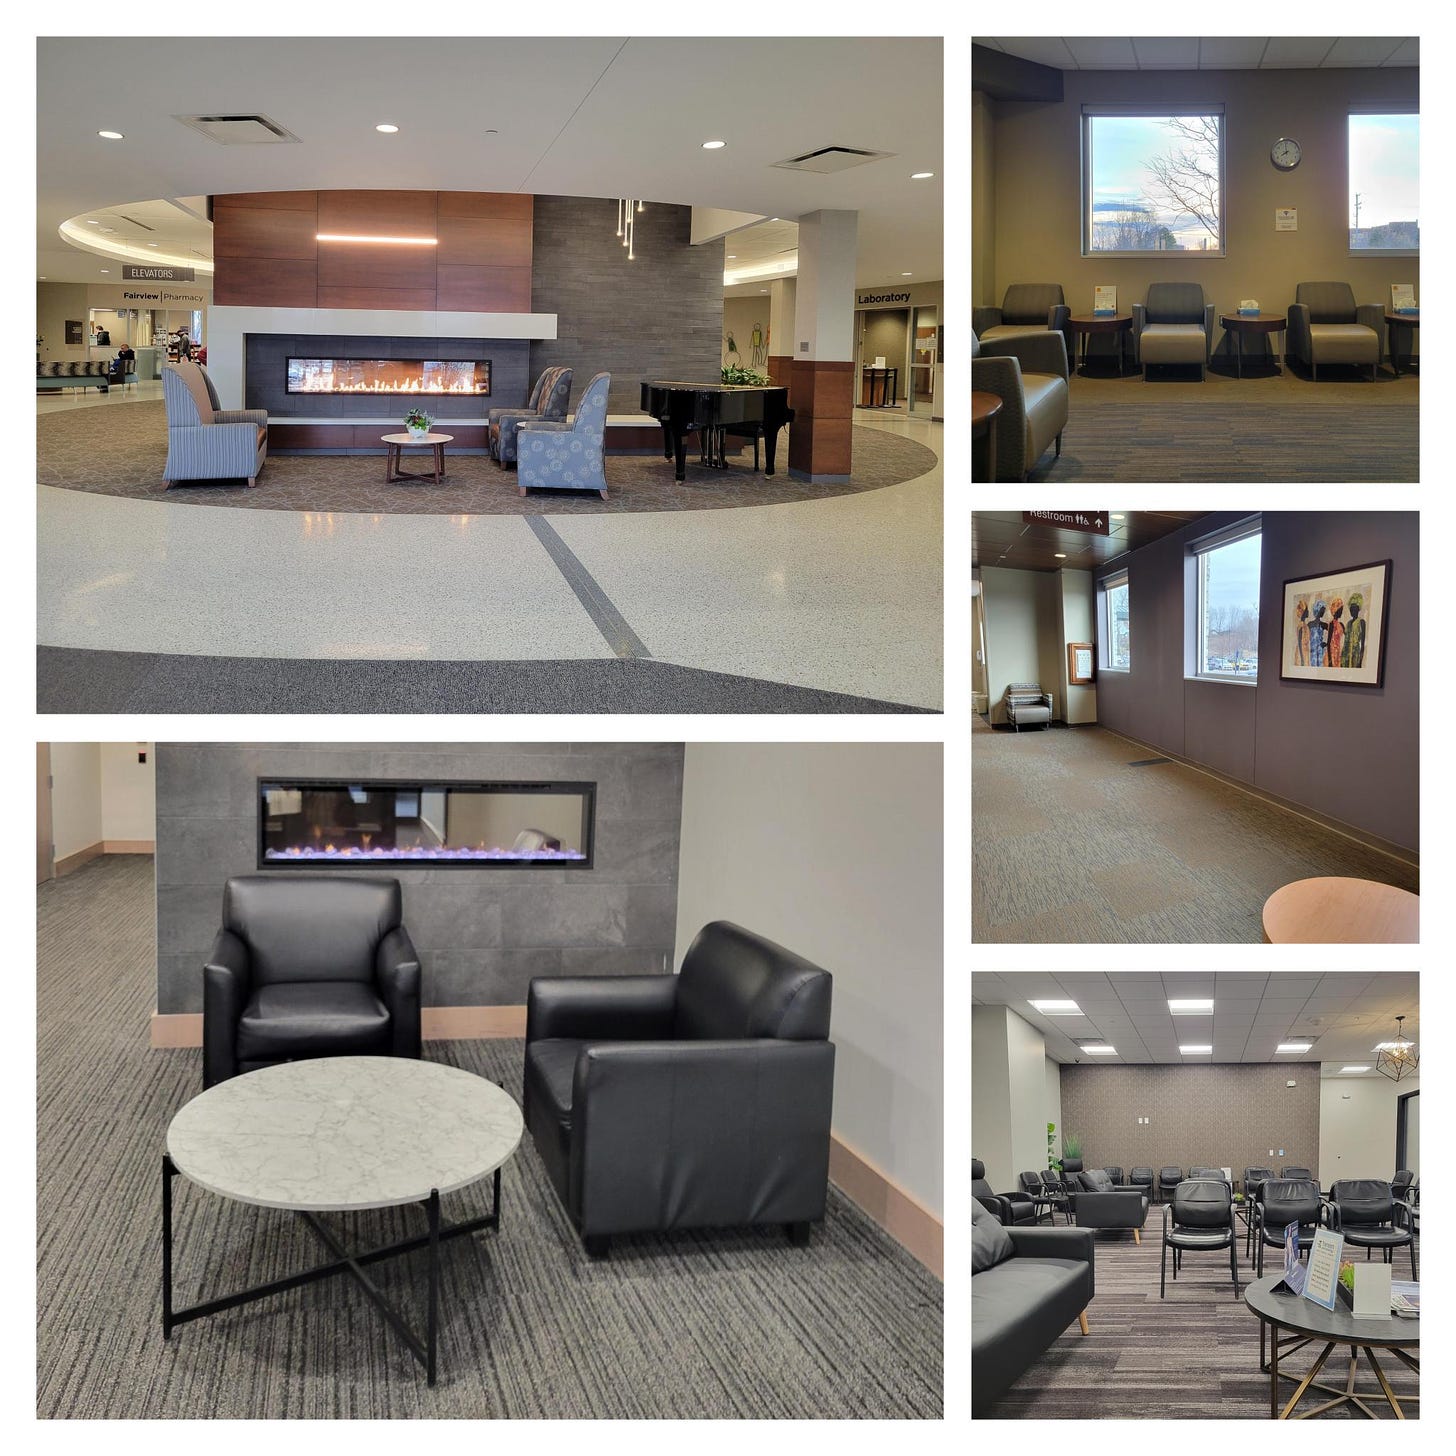 A five photo collage of waiting areas at the various health centers I have visited lately. They show empty waiting rooms and hallways with matching furniture and fireplaces.